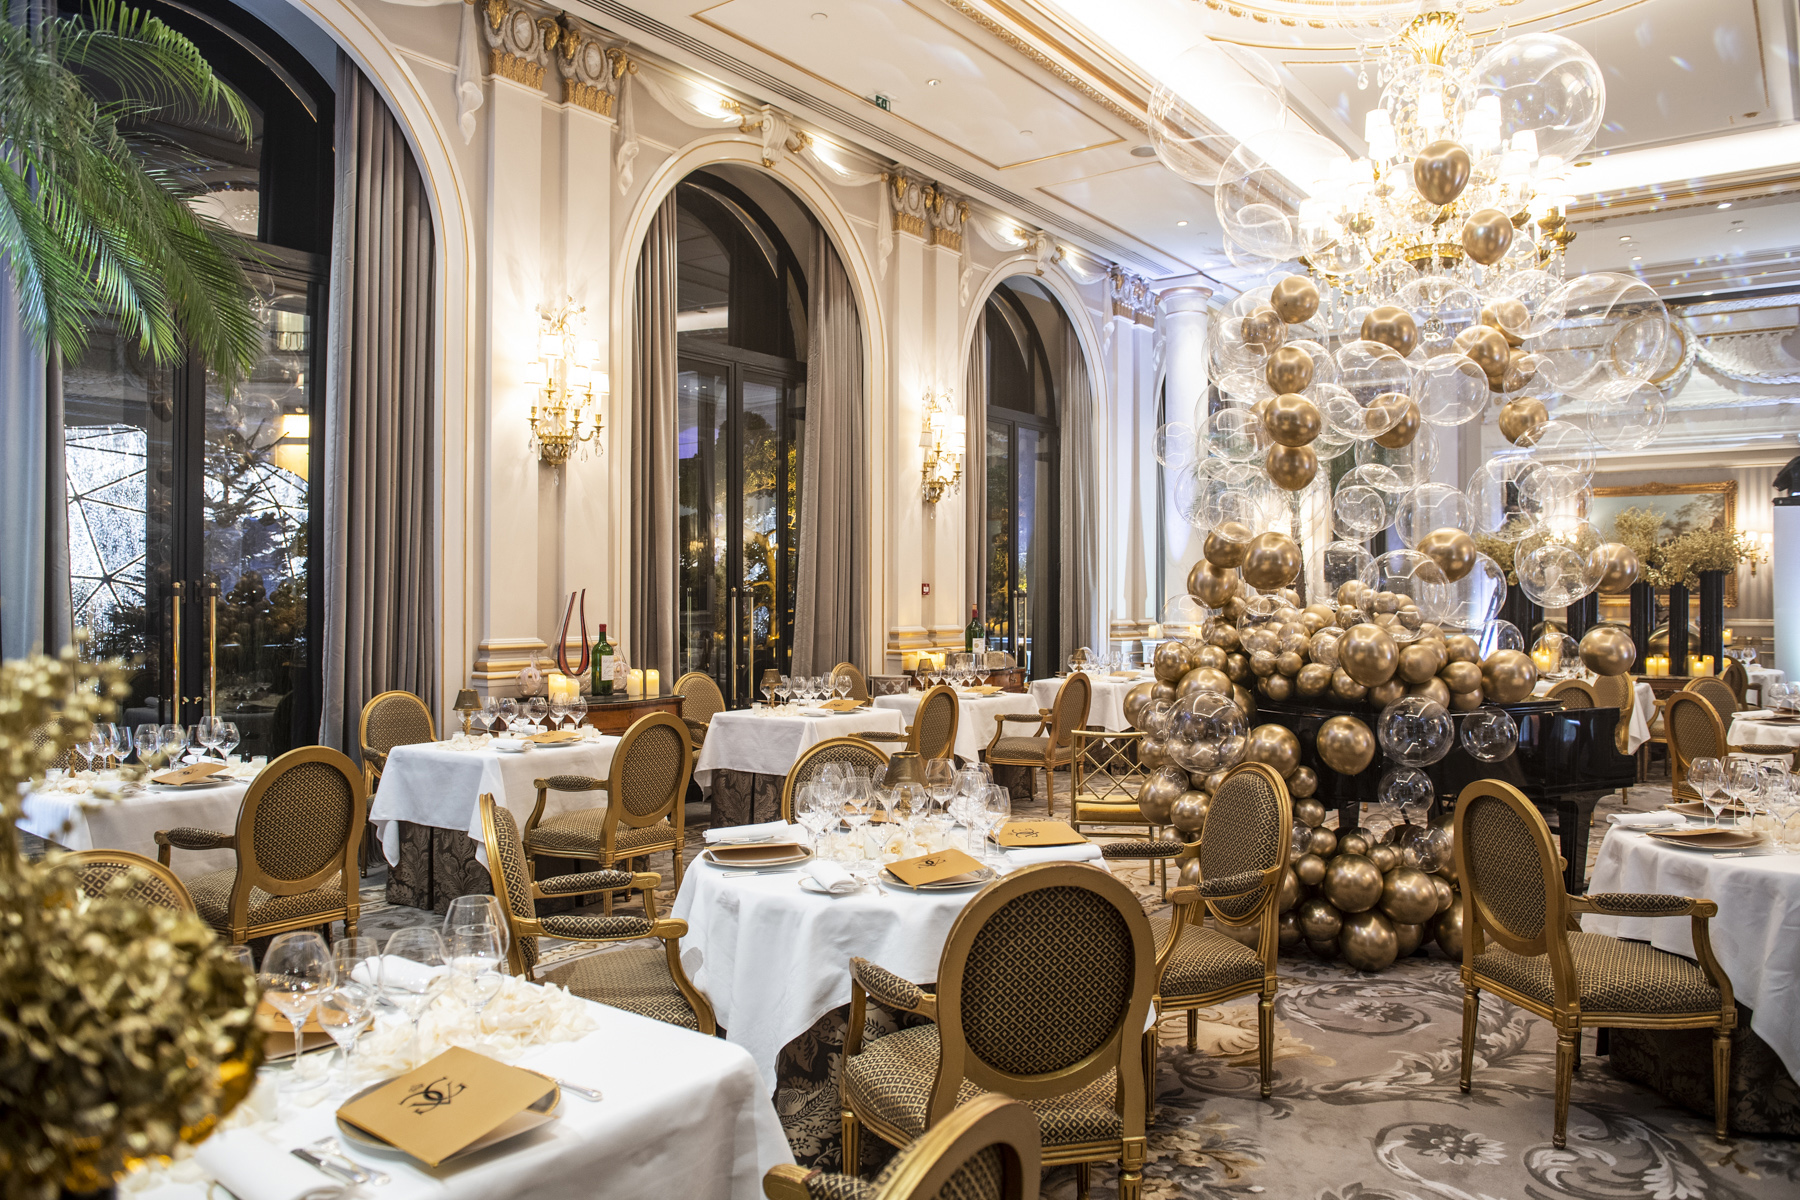 On December 1st, 3 Michelin stars restaurant Le Cinq will host an exclusive diner “Sur un Air d'Opera” with food, wine and music pairing